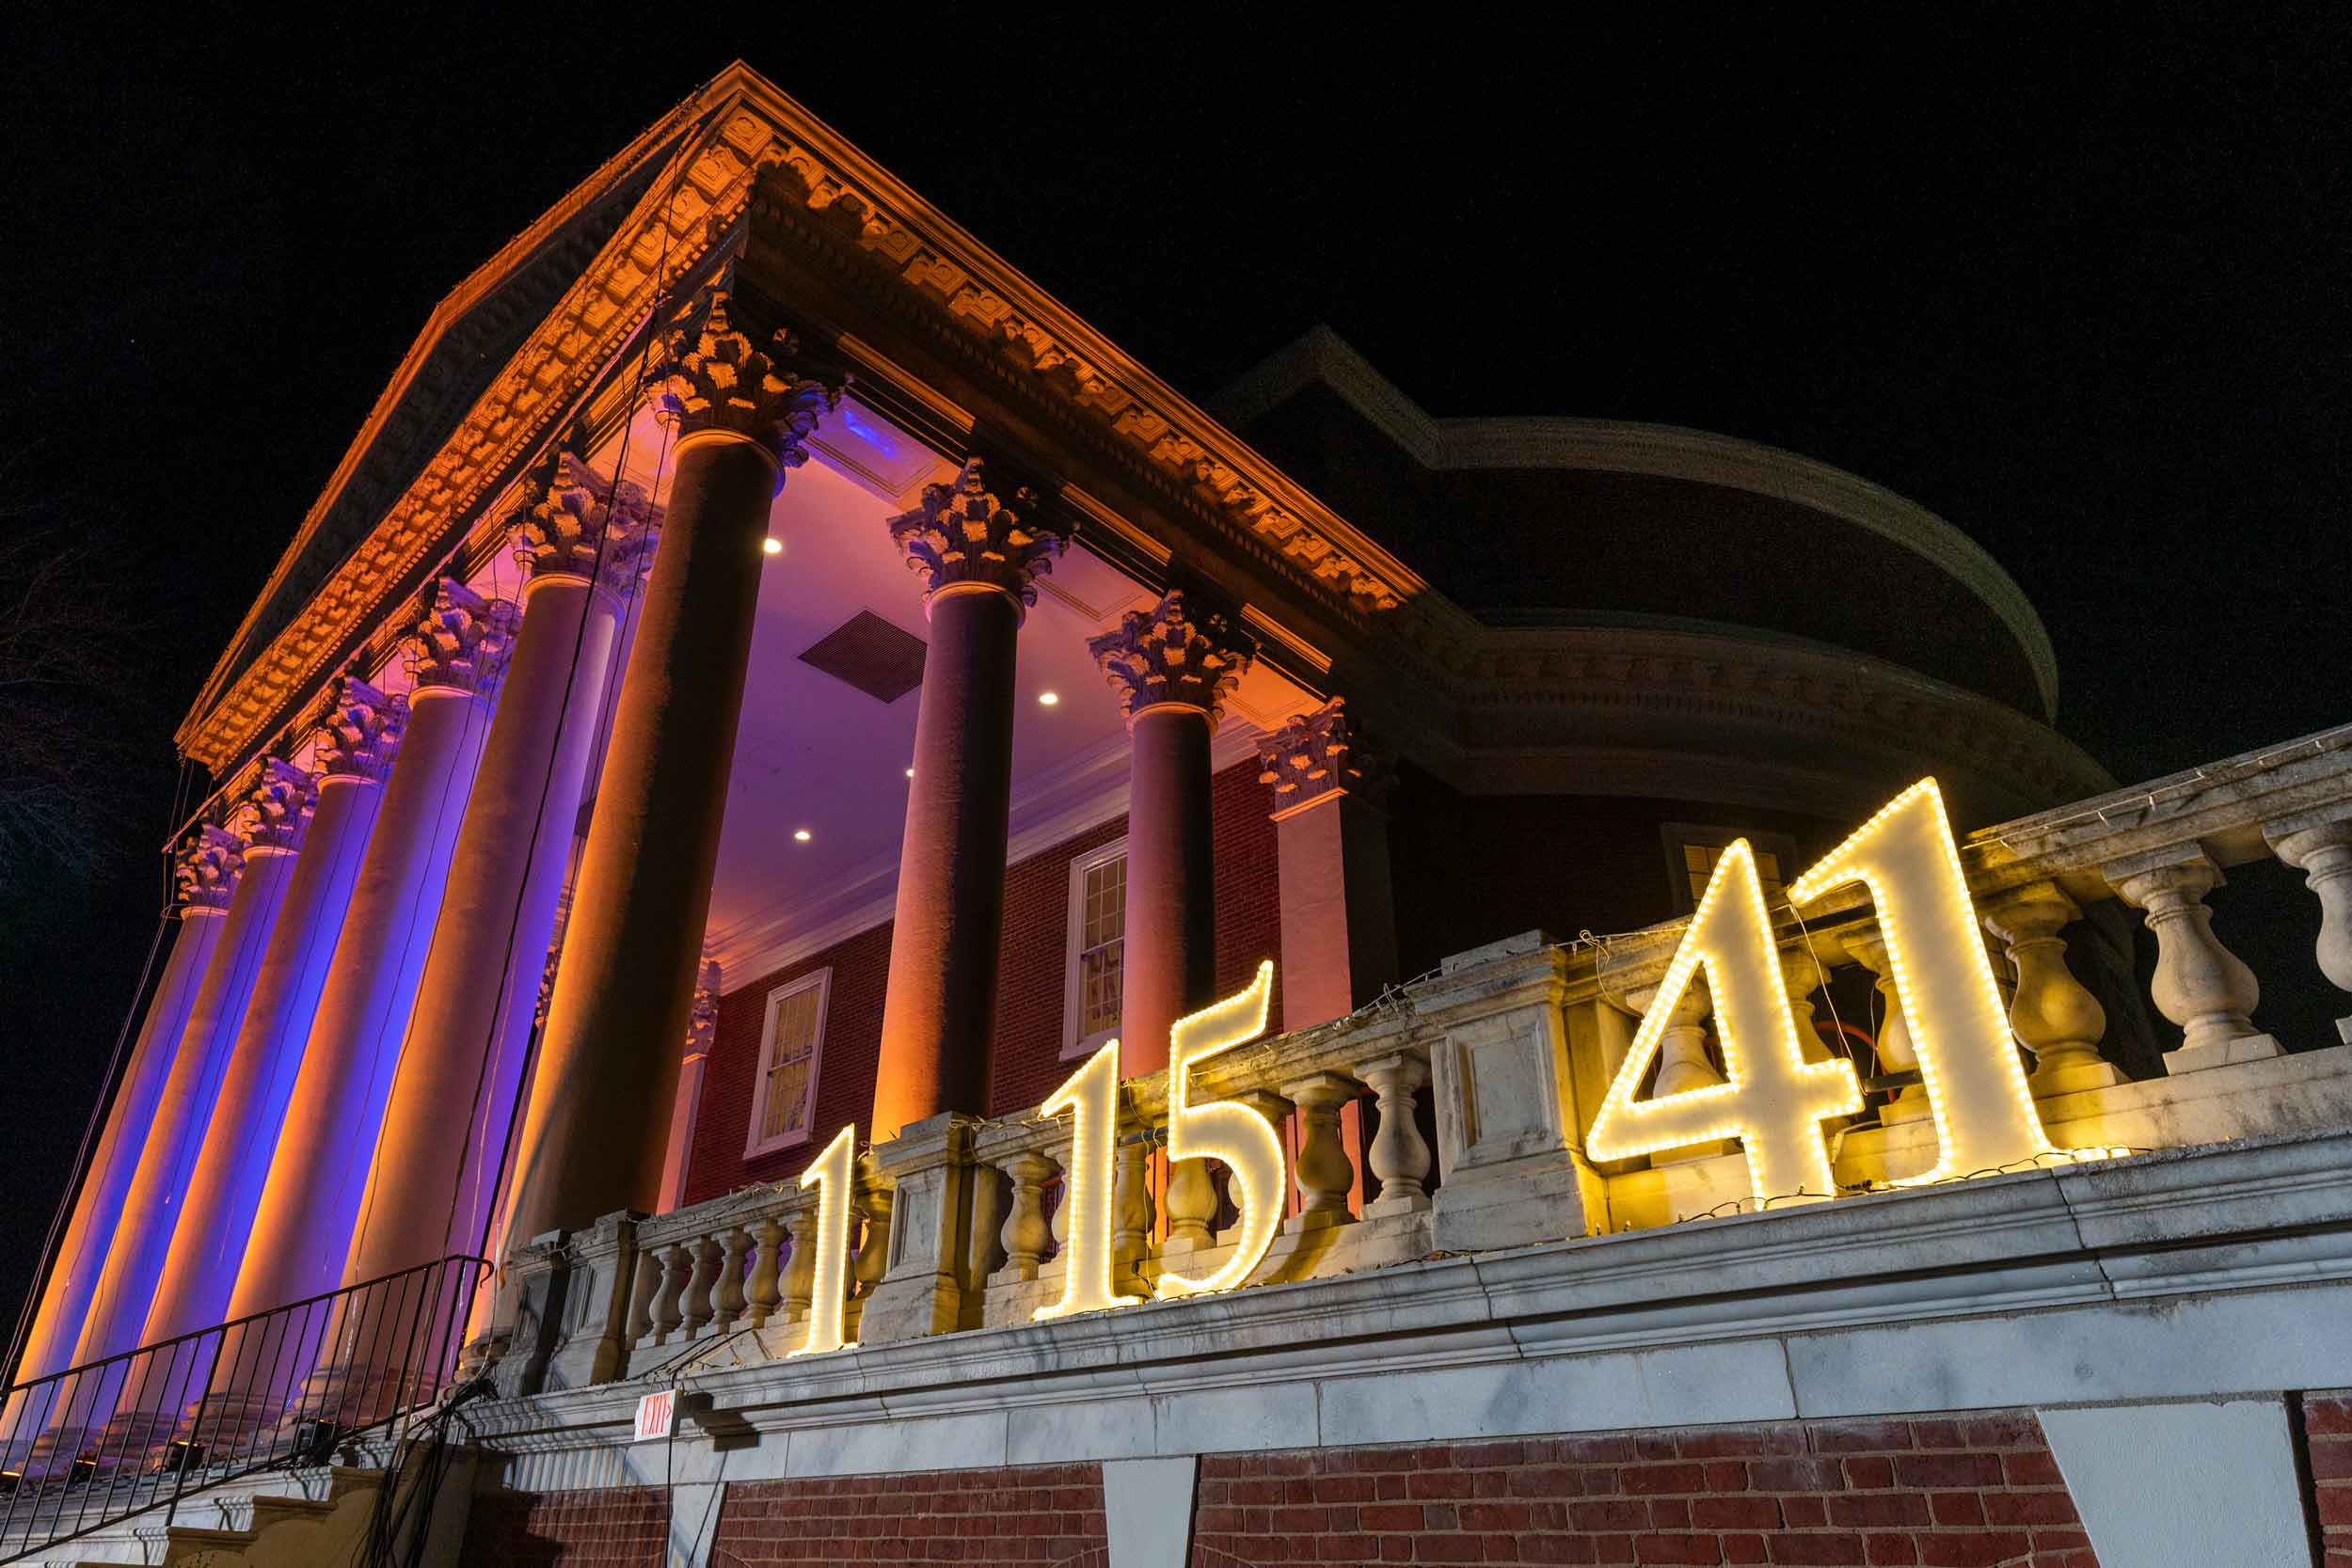 The numbers 1, 15, and 41 lit up in white lights on the Rotunda wall